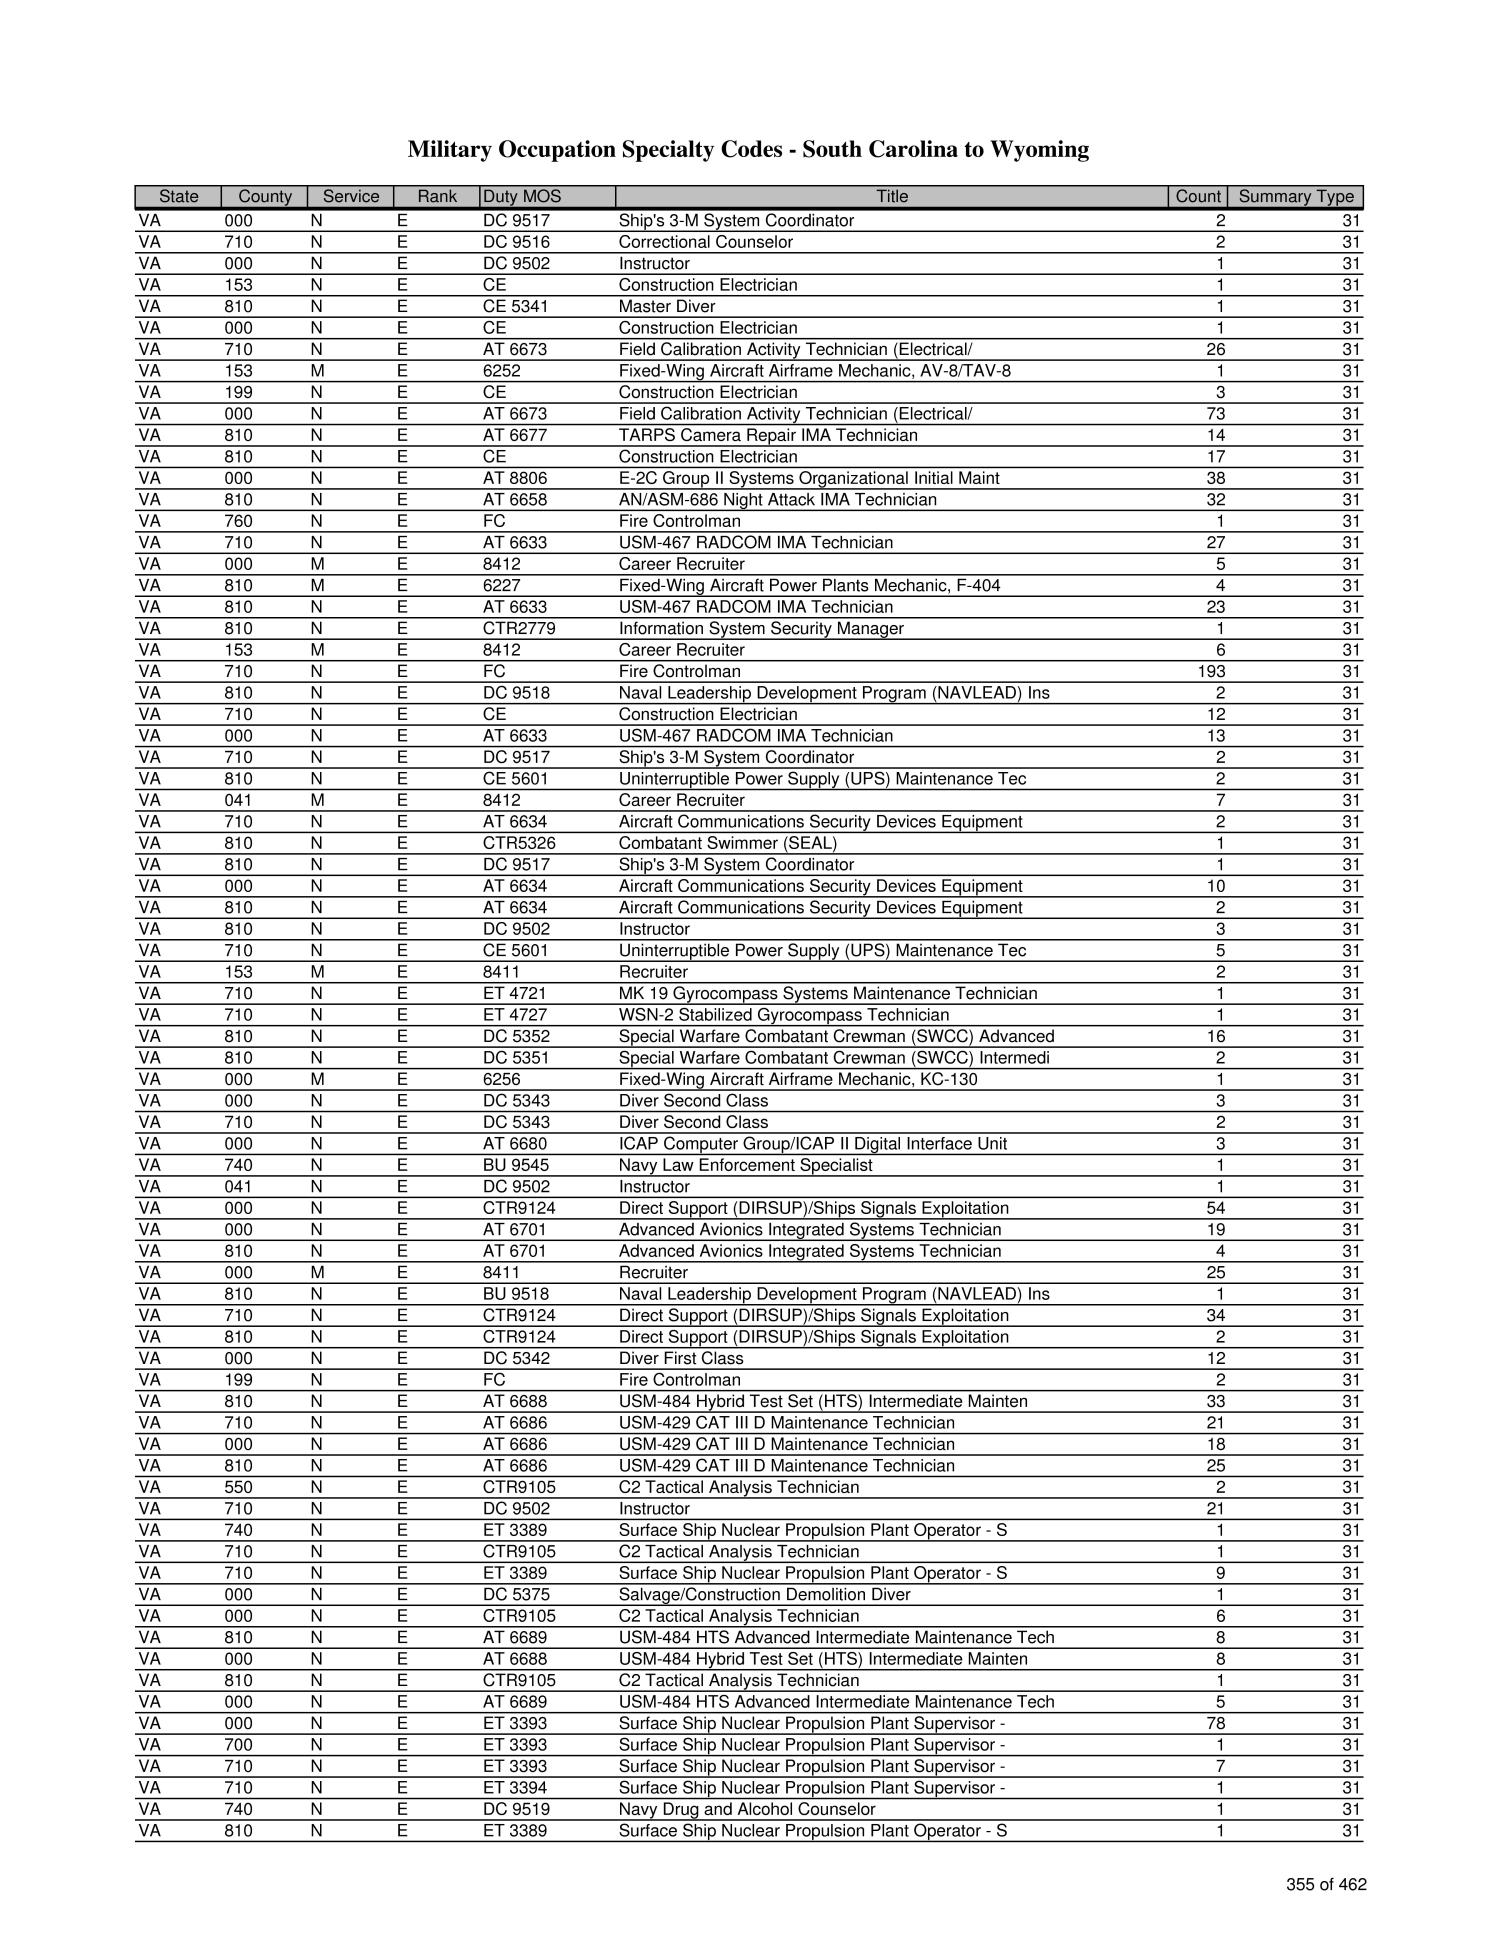 list-of-military-occupation-specialty-codes-mos-by-state-and-county-page-1-229-of-1-684